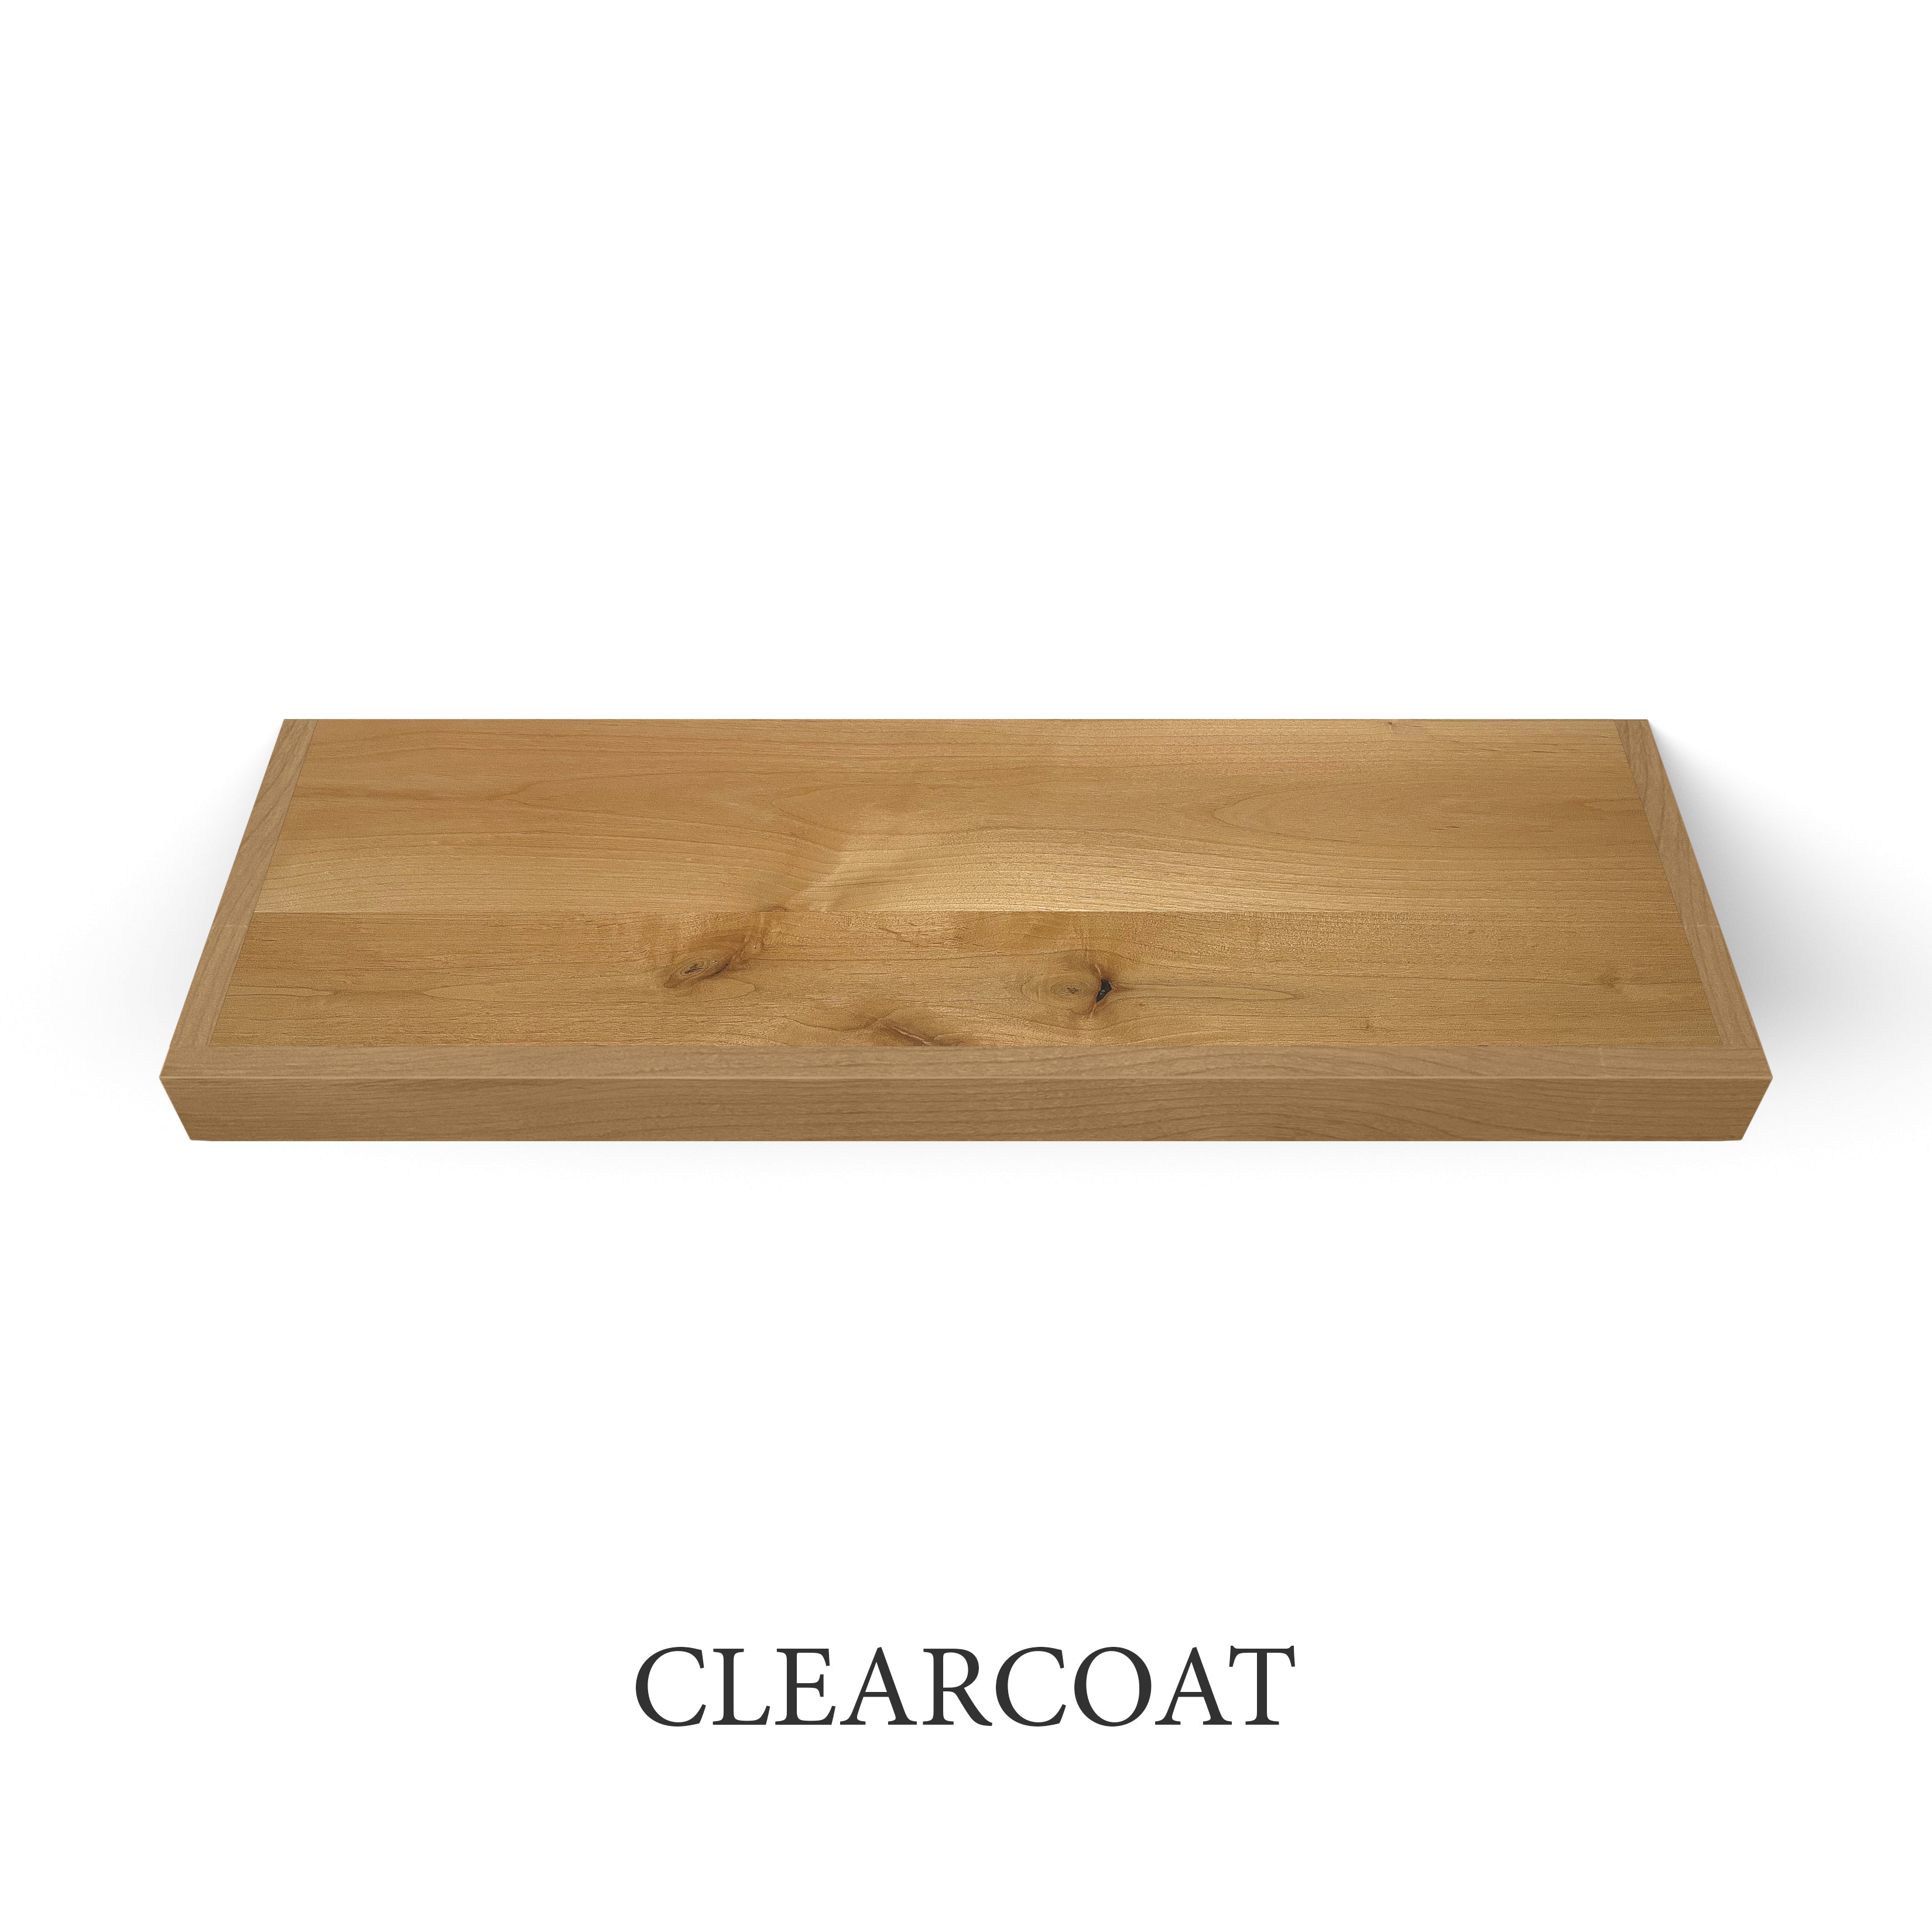 clearcoat Rustic Alder 2 Inch Thick LED Lighted Floating Shelves - Battery